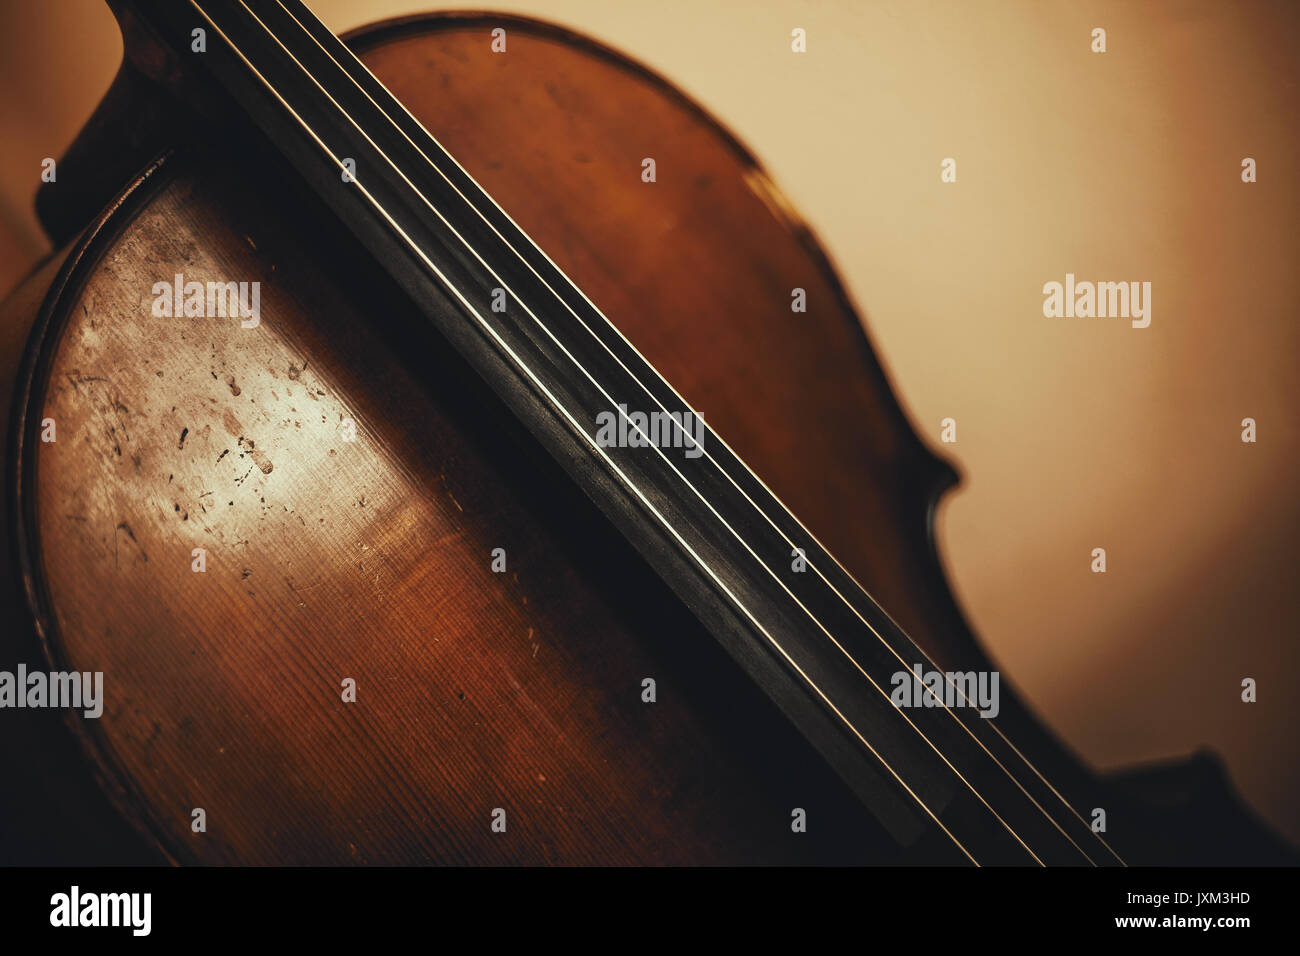 Closeup of an old cello, body and neck part. Stock Photo